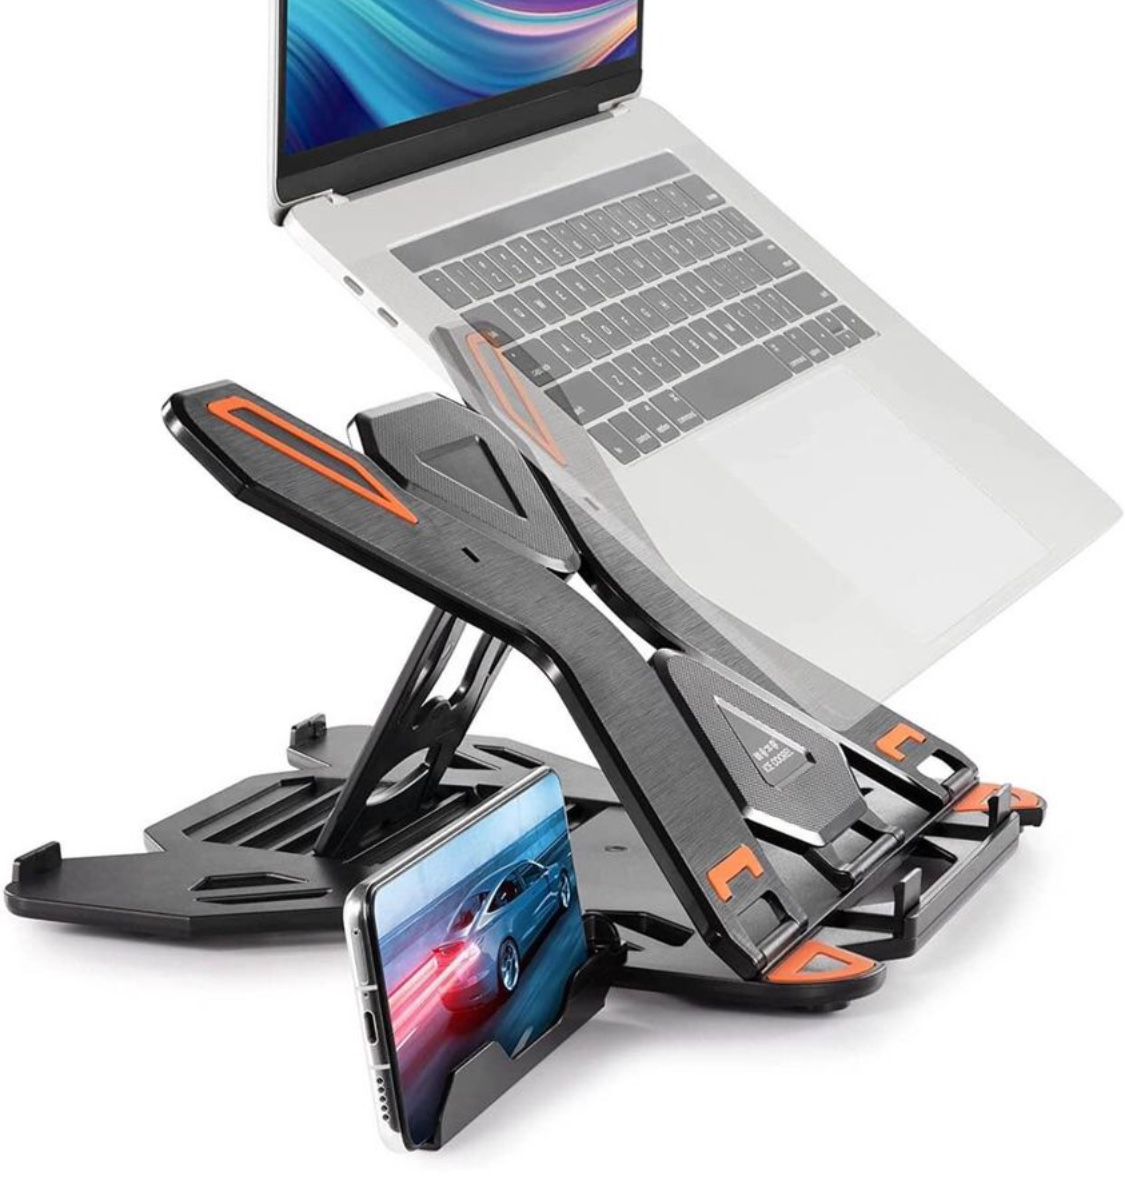 New! Laptop Stand with Phone Holder, Laptop Stand for Desk Adjustable Height, Portable Laptop Riser